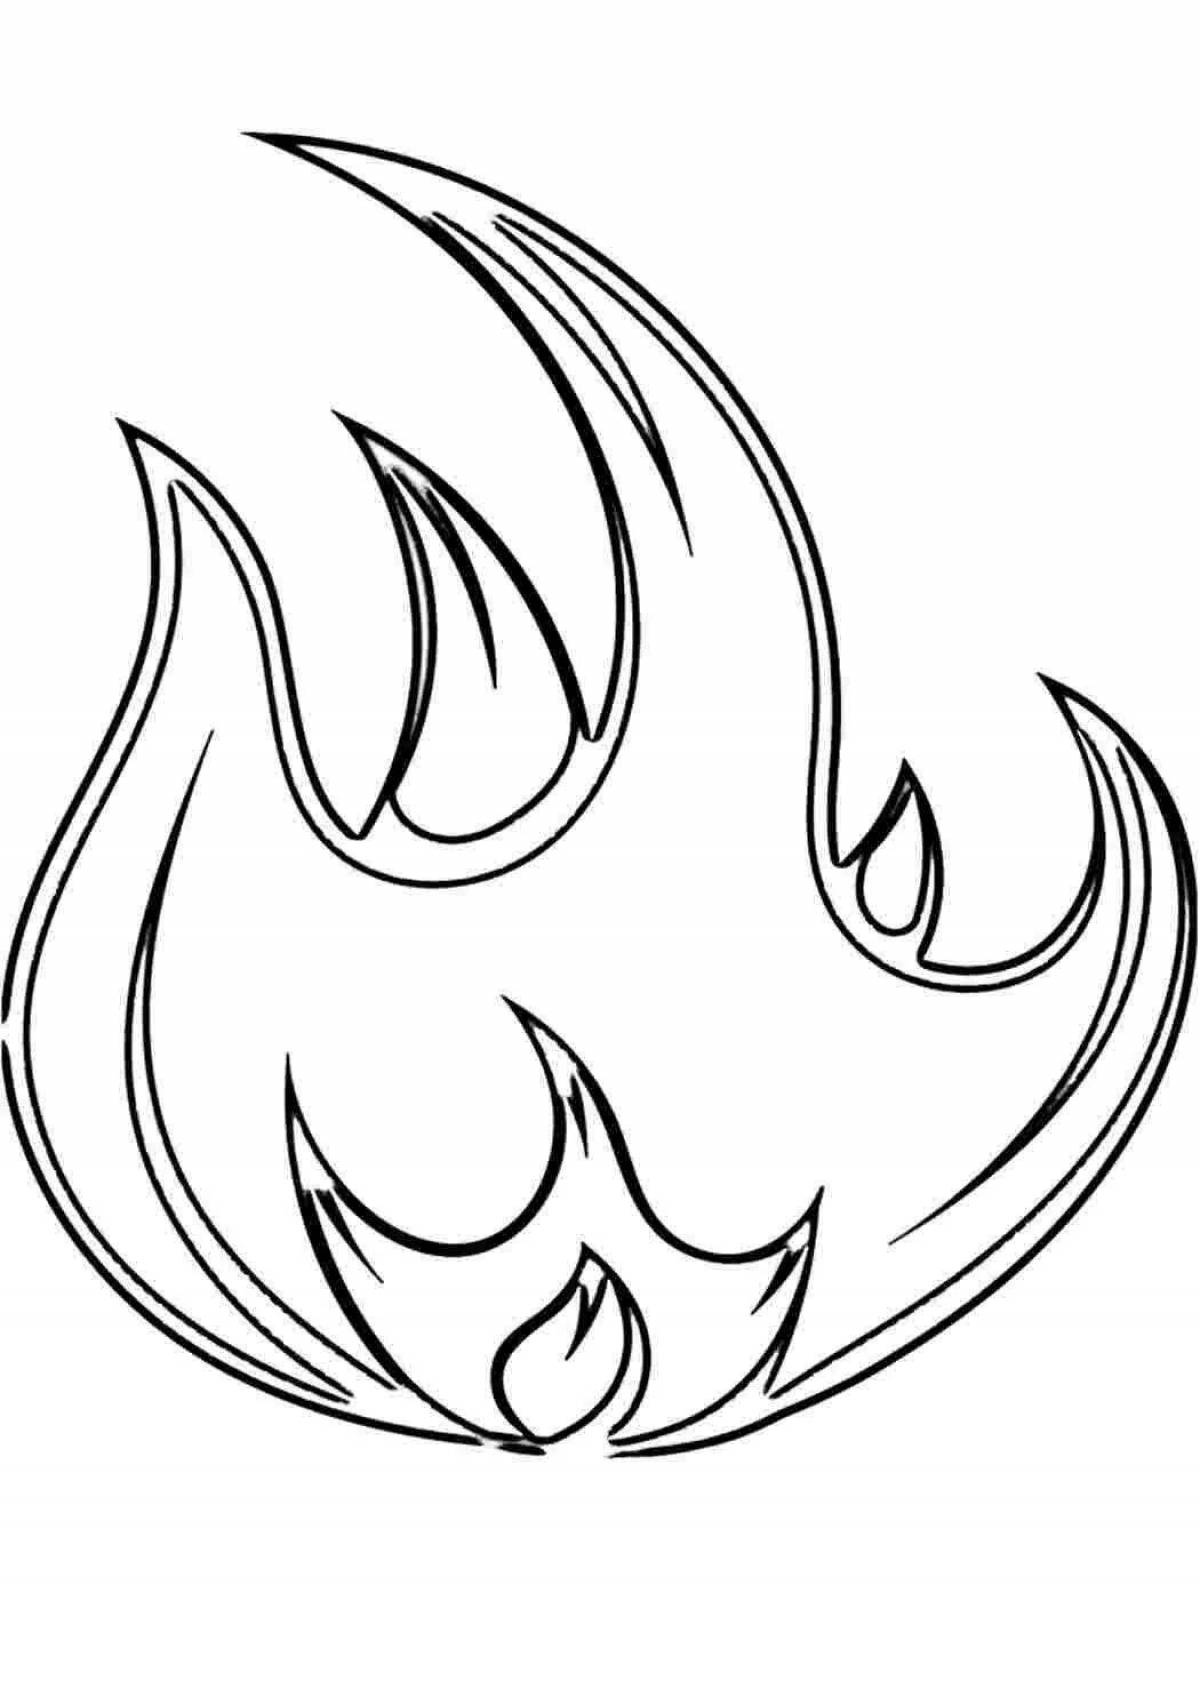 Radiant Flames coloring page for kids